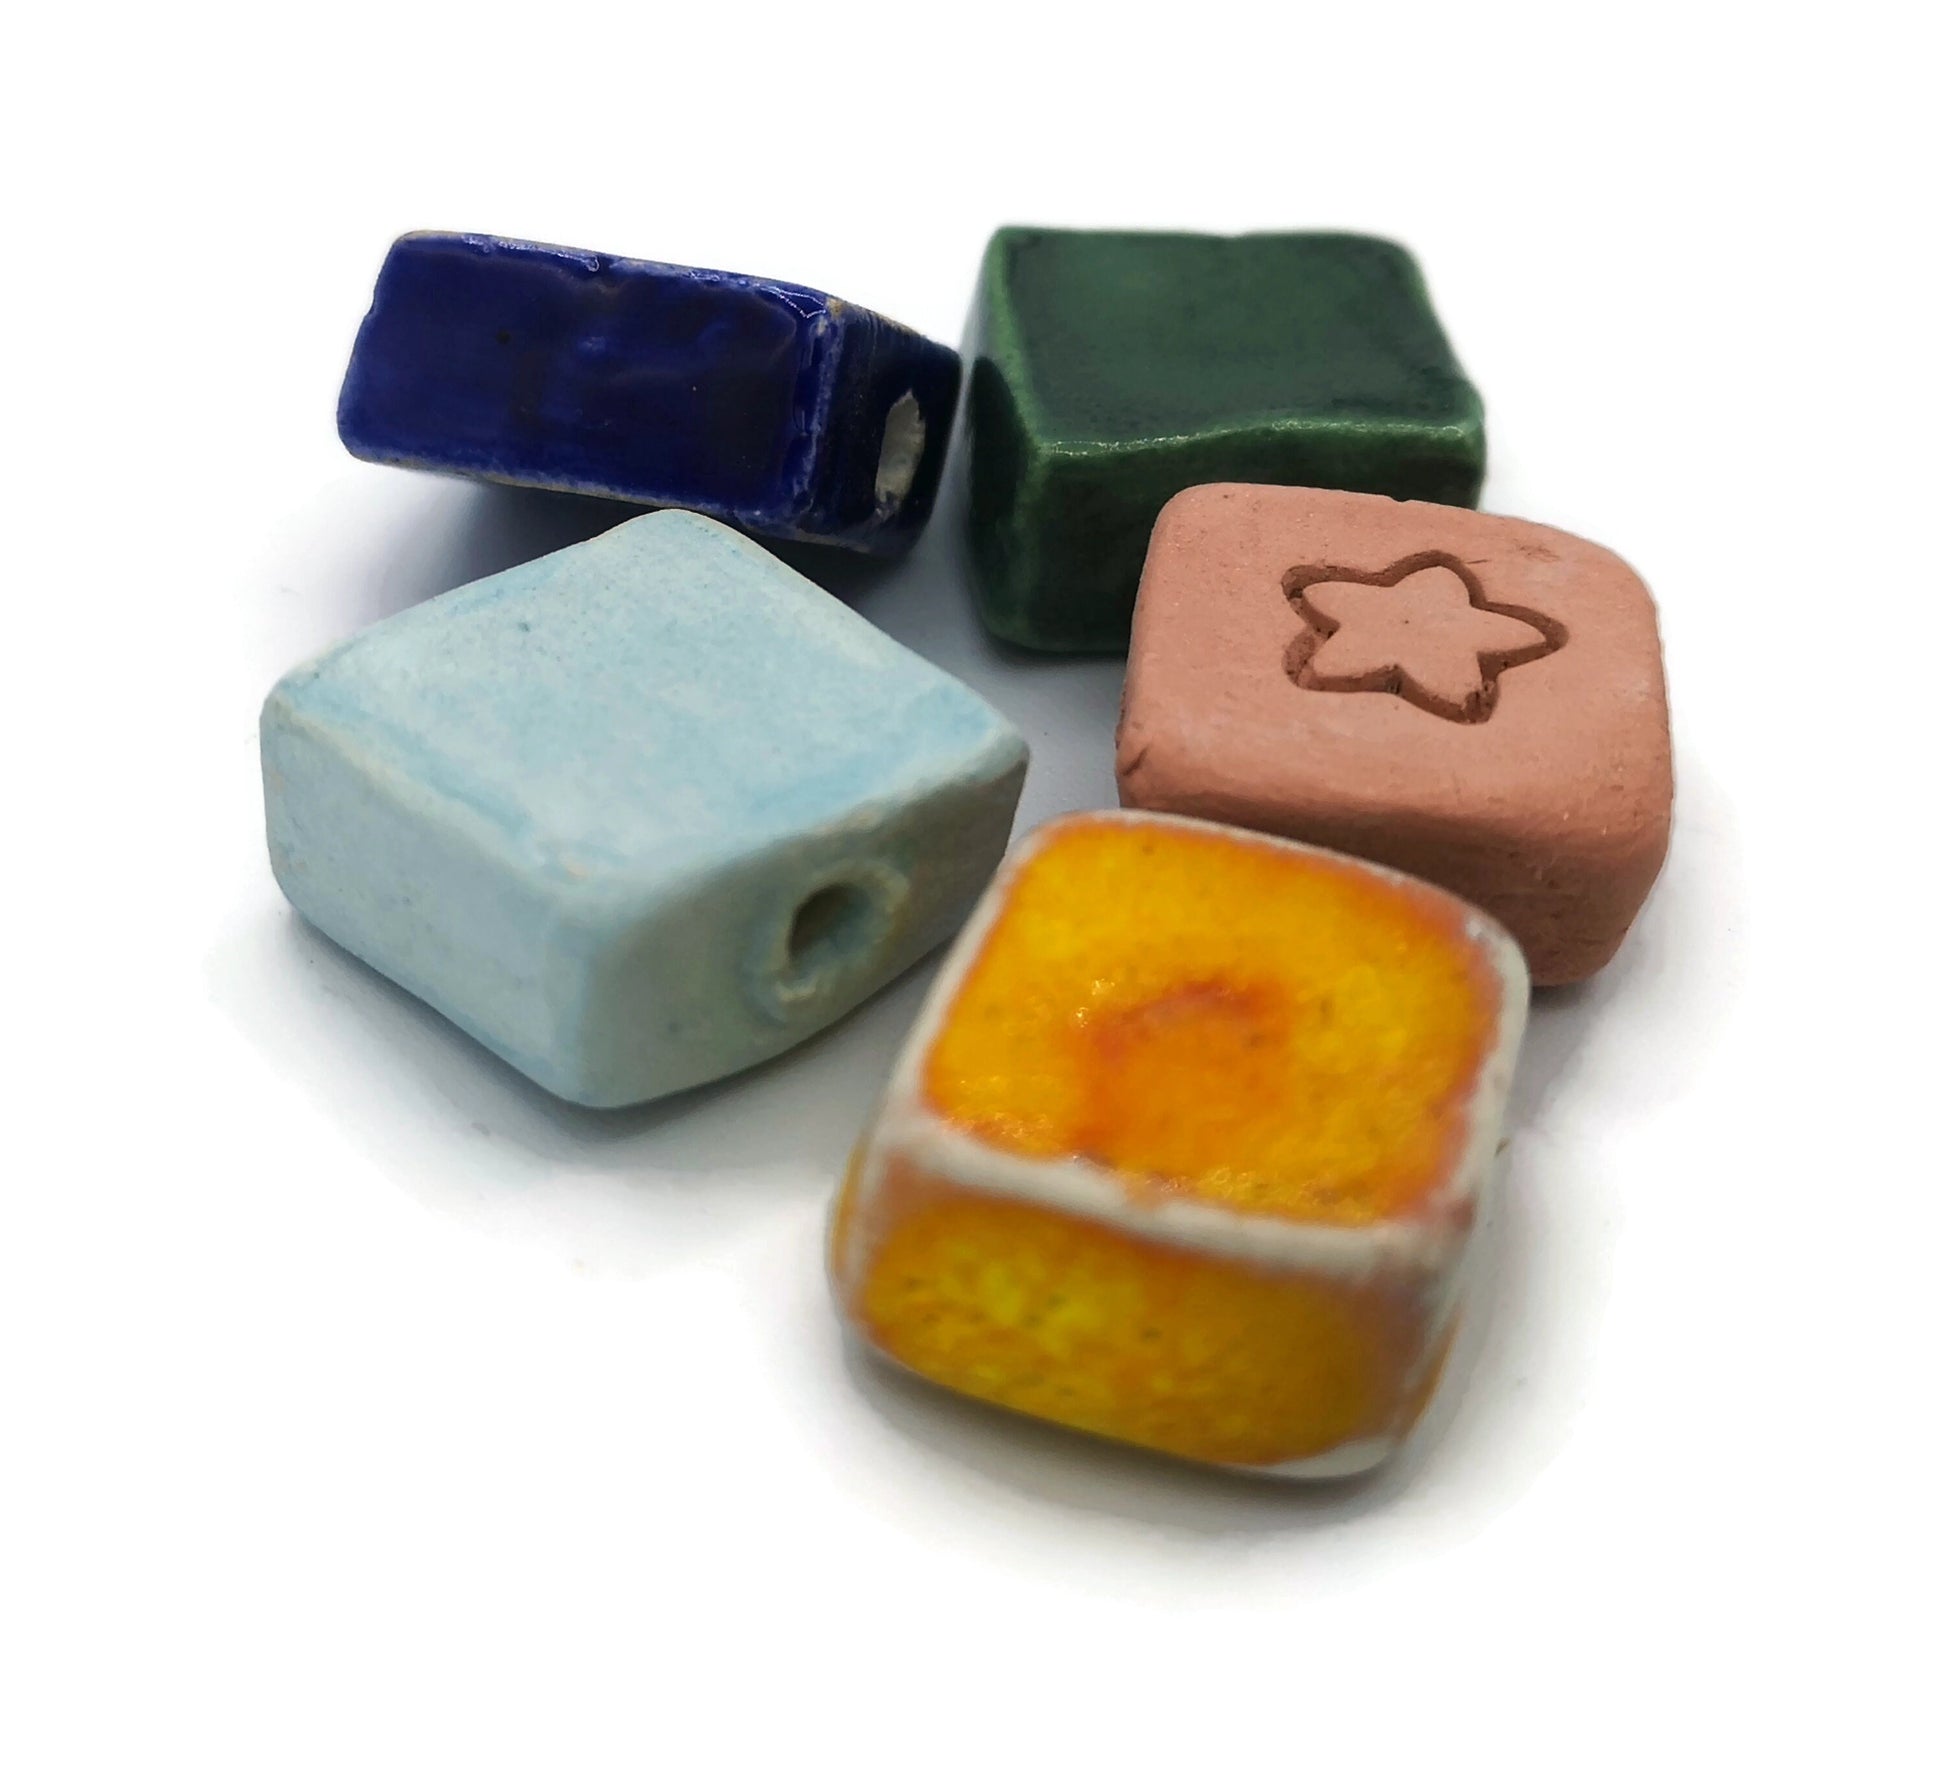 Handmade Ceramic Beads For Jewelry Making, Set Of 5 Assorted Clay Beads, Pendant Necklace Best Sellers, Unique Square beads, Large Porcelain - Ceramica Ana Rafael